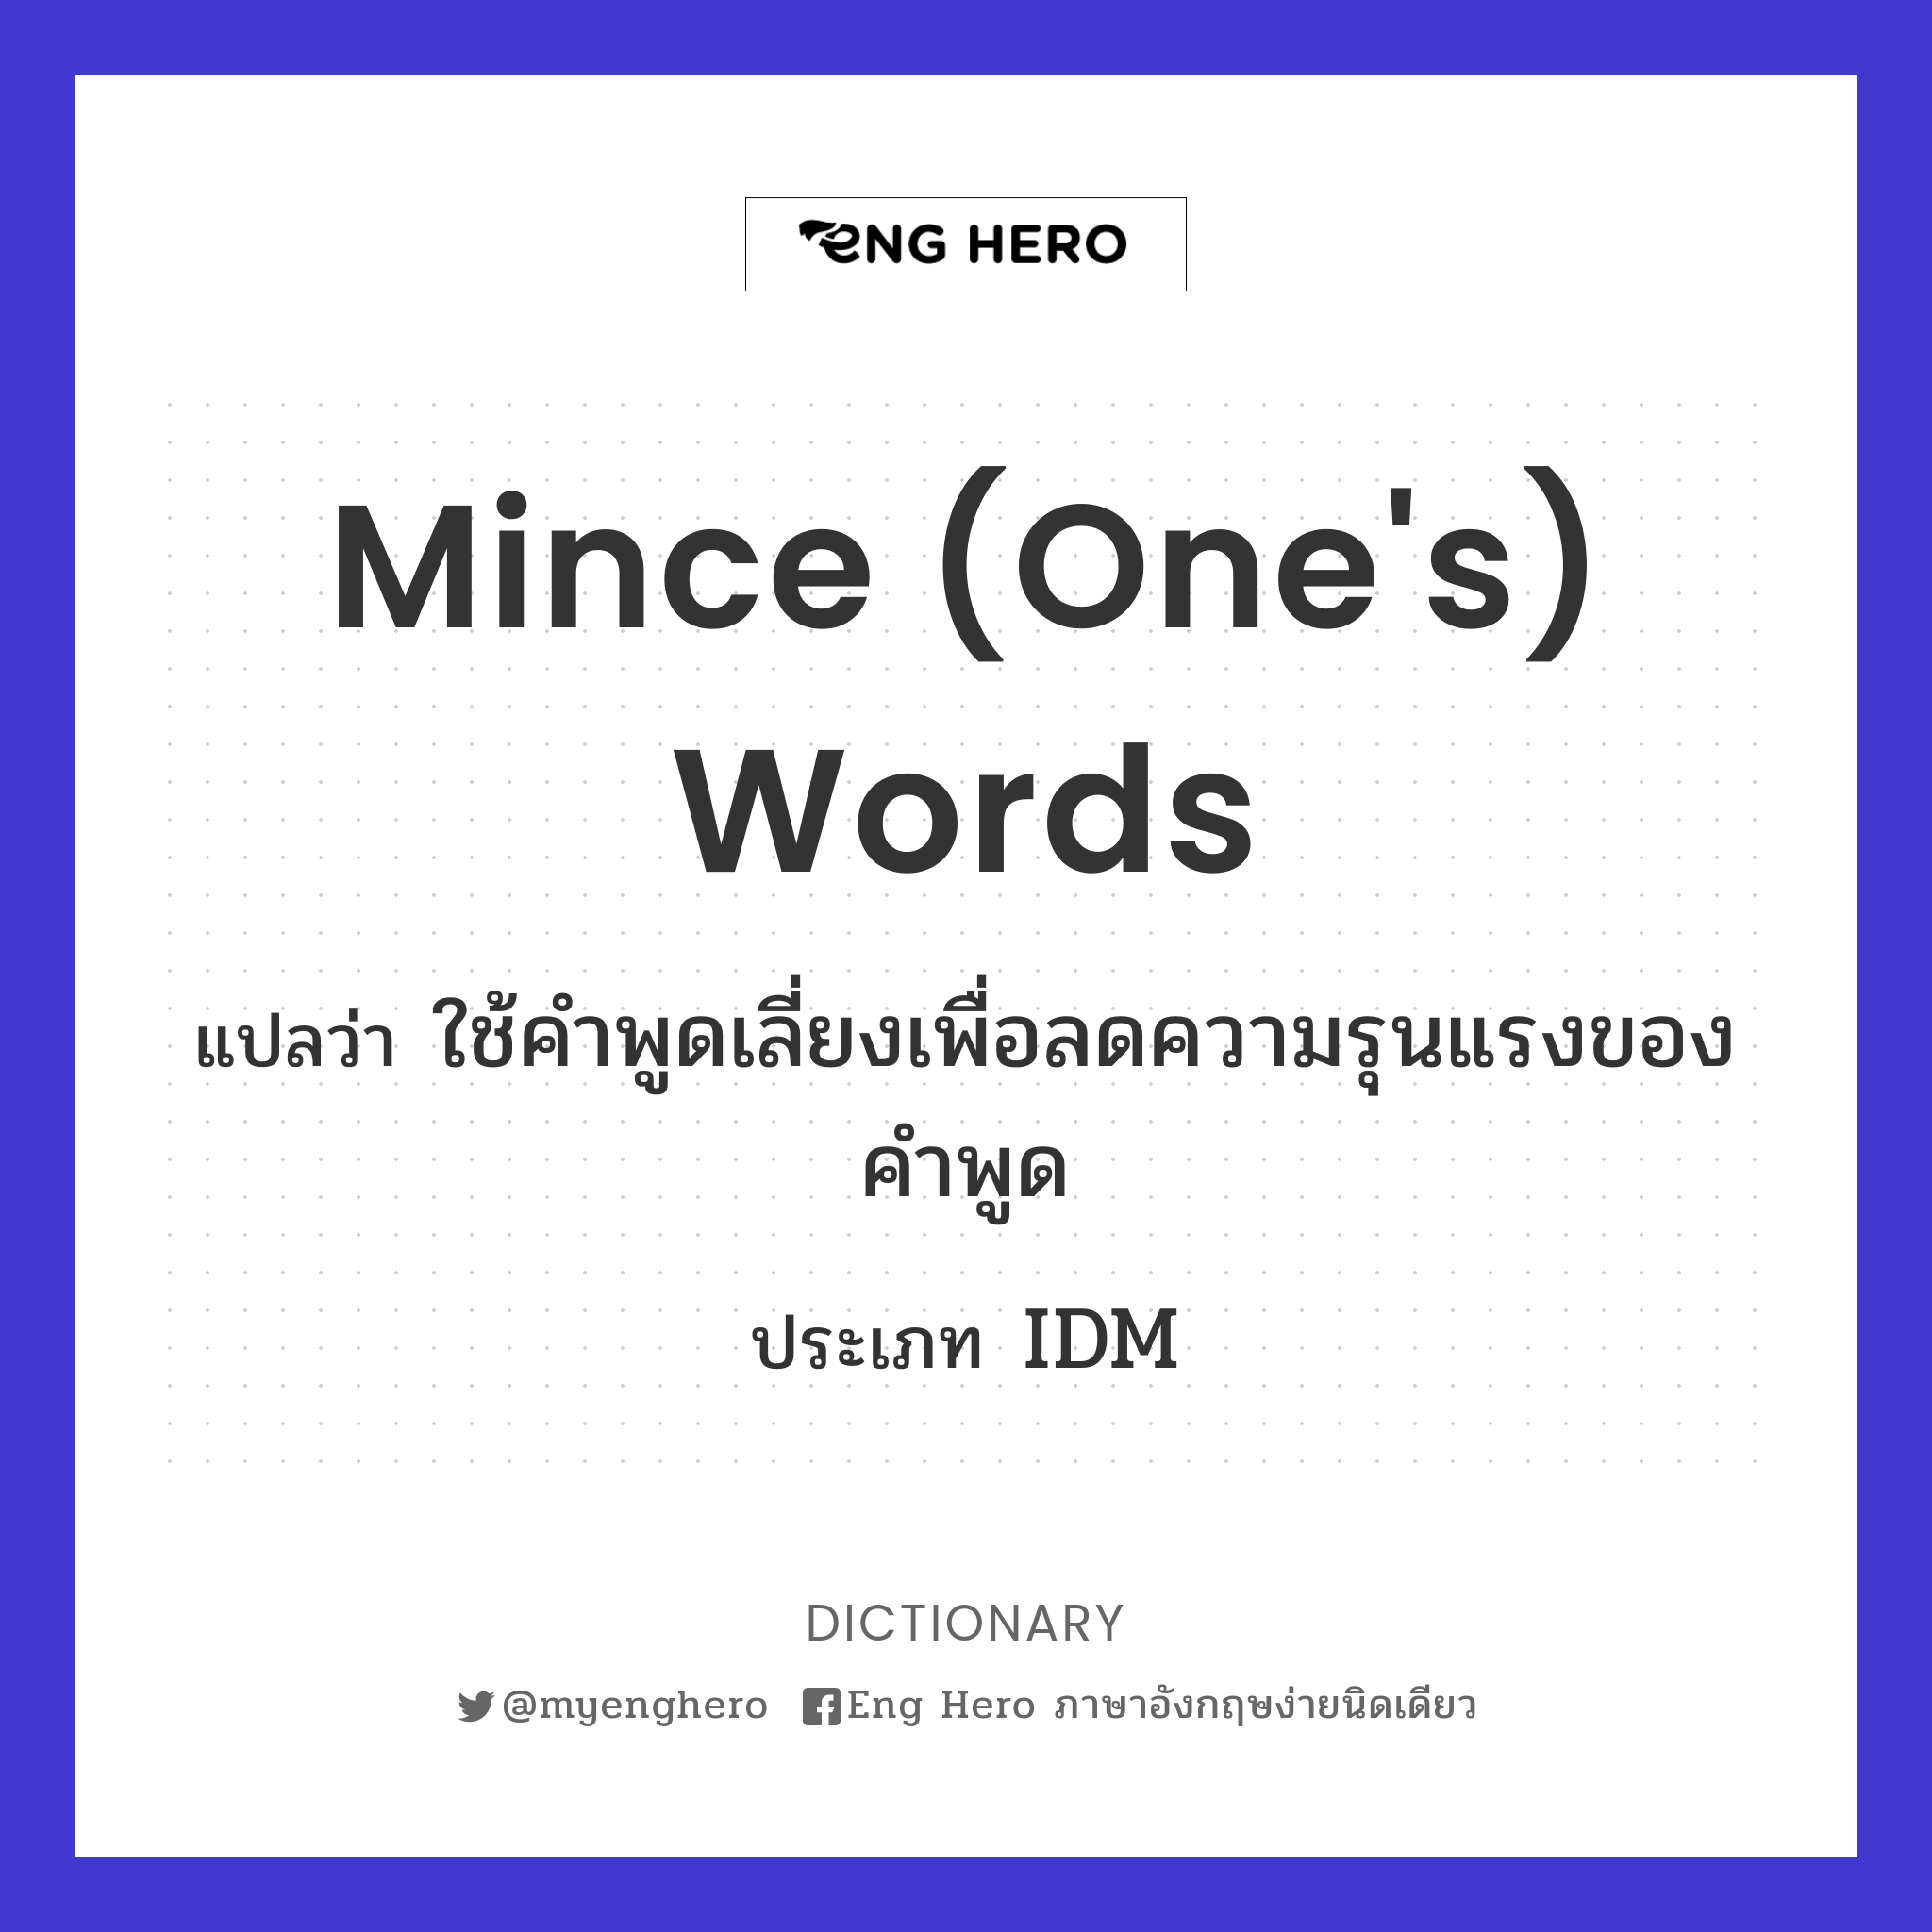 mince (one's) words